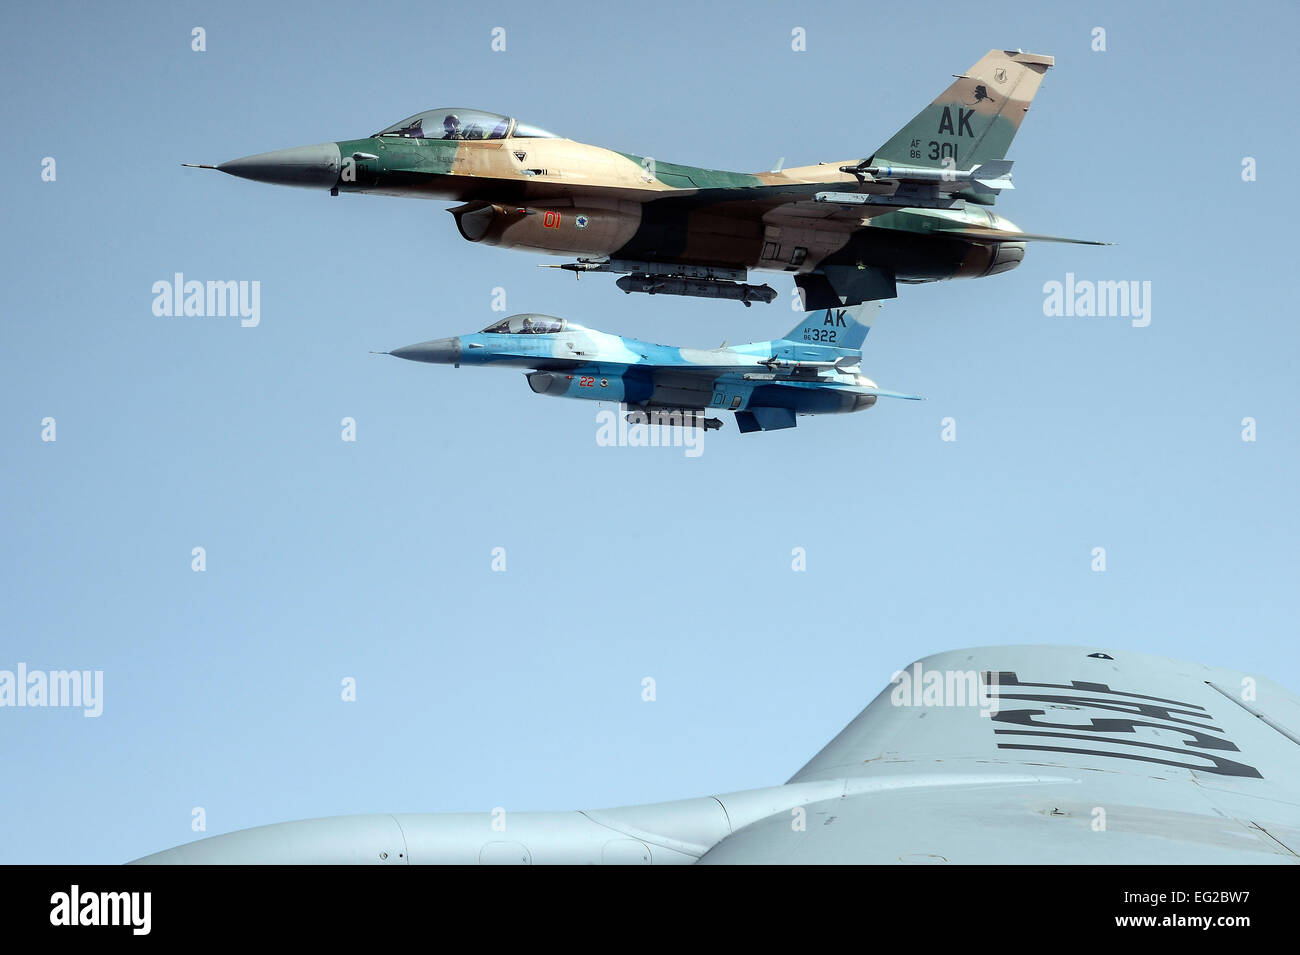 Two F-16 Fighting Falcons from the 18th Aggressor Squadron fly alongside a KC-135 Stratotanker during Red Flag-Alaska 14, May 15, 2014 over the Joint Pacific Alaska Range Complex. The 18th AS out of Eielson Air Force Base, Alaska, trains allied and coalition forces with real-world combat scenarios by mimicking adversarial flying techniques.  Senior Airman Zachary Perras Stock Photo